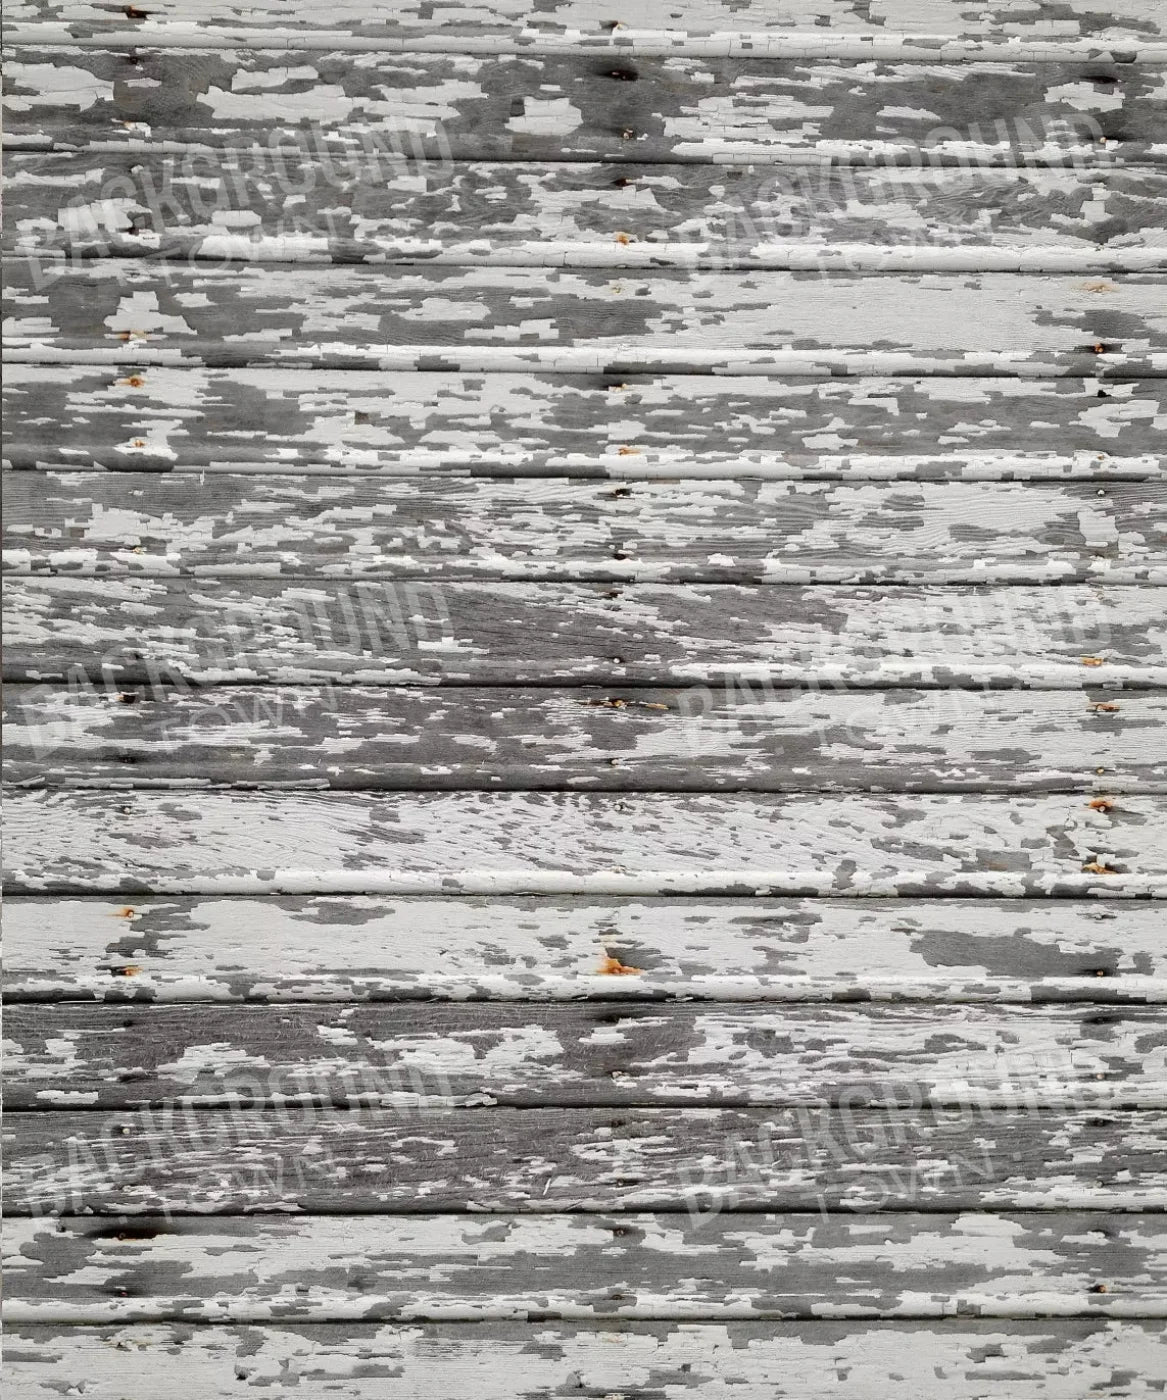 Gray Wood Backdrop for Photography